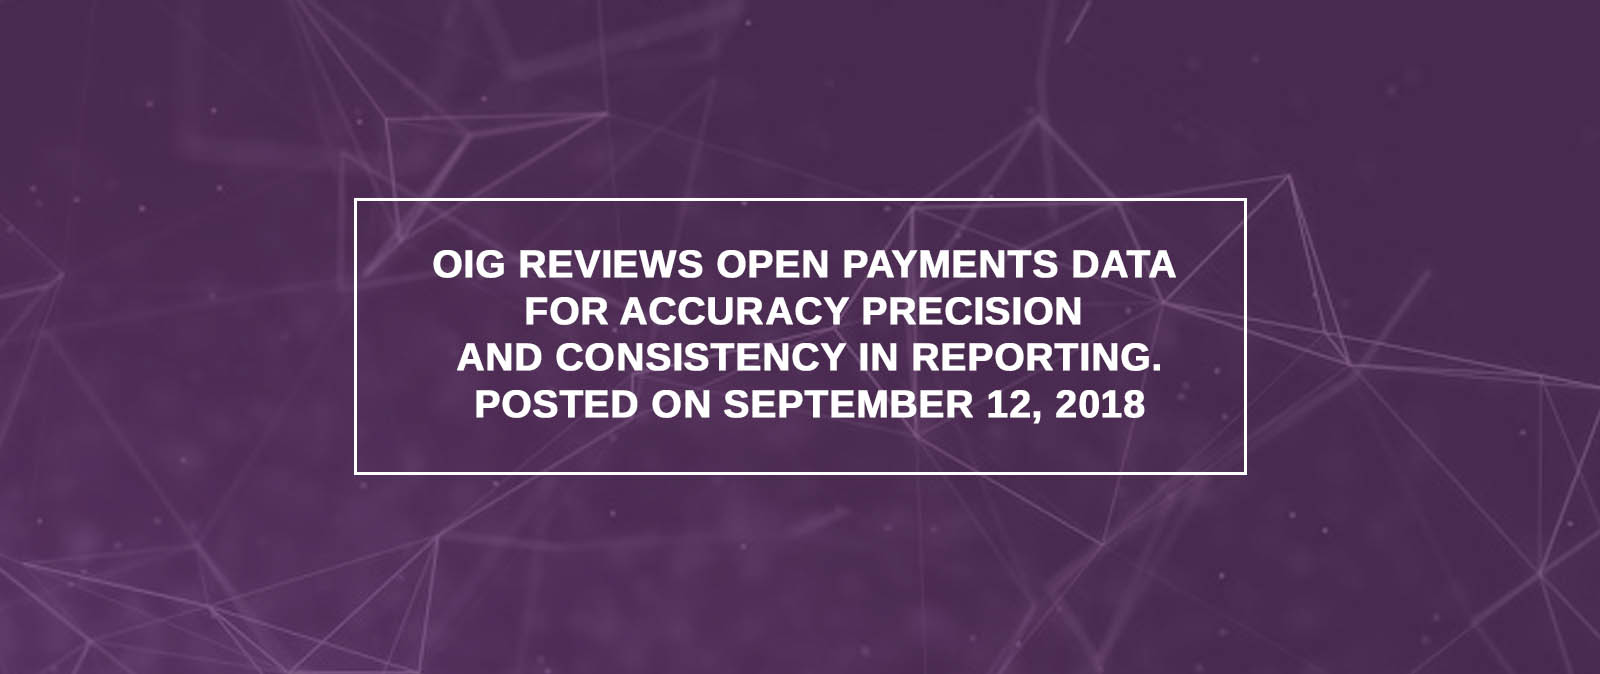 OIG Reviews Open Payments Data For Accuracy Precision And Consistency In Reporting